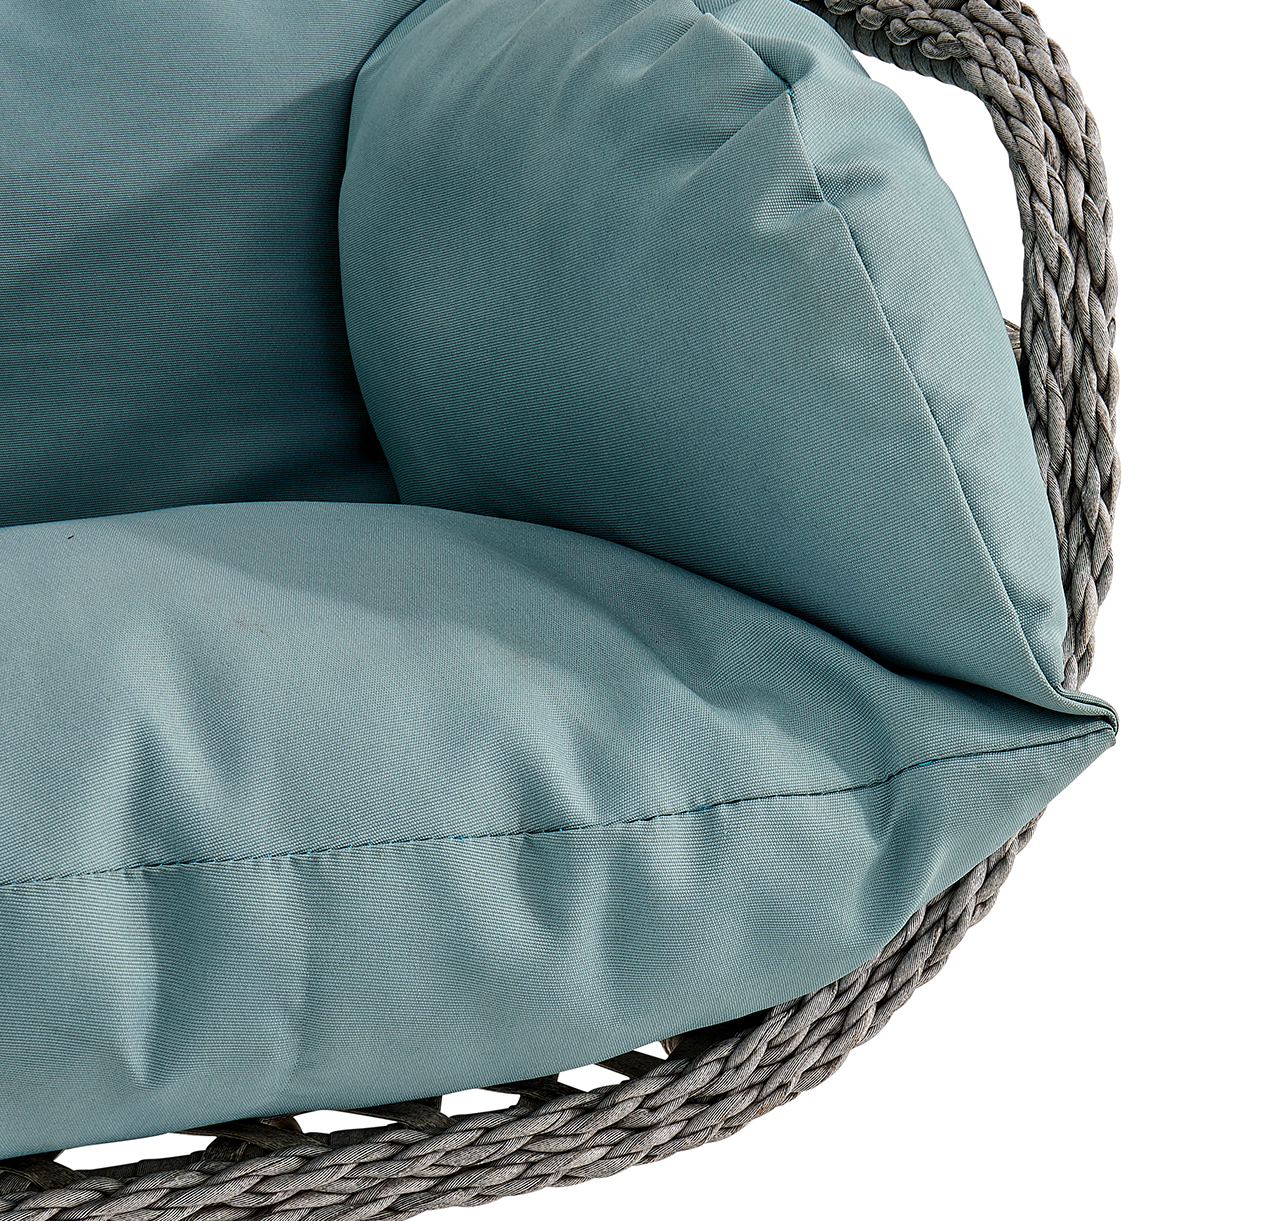 Outdoor Hanging Lounge Chair Backyard Patio Resin Wicker with Armrest Chair UV Resistant, Aqua - image 2 of 5